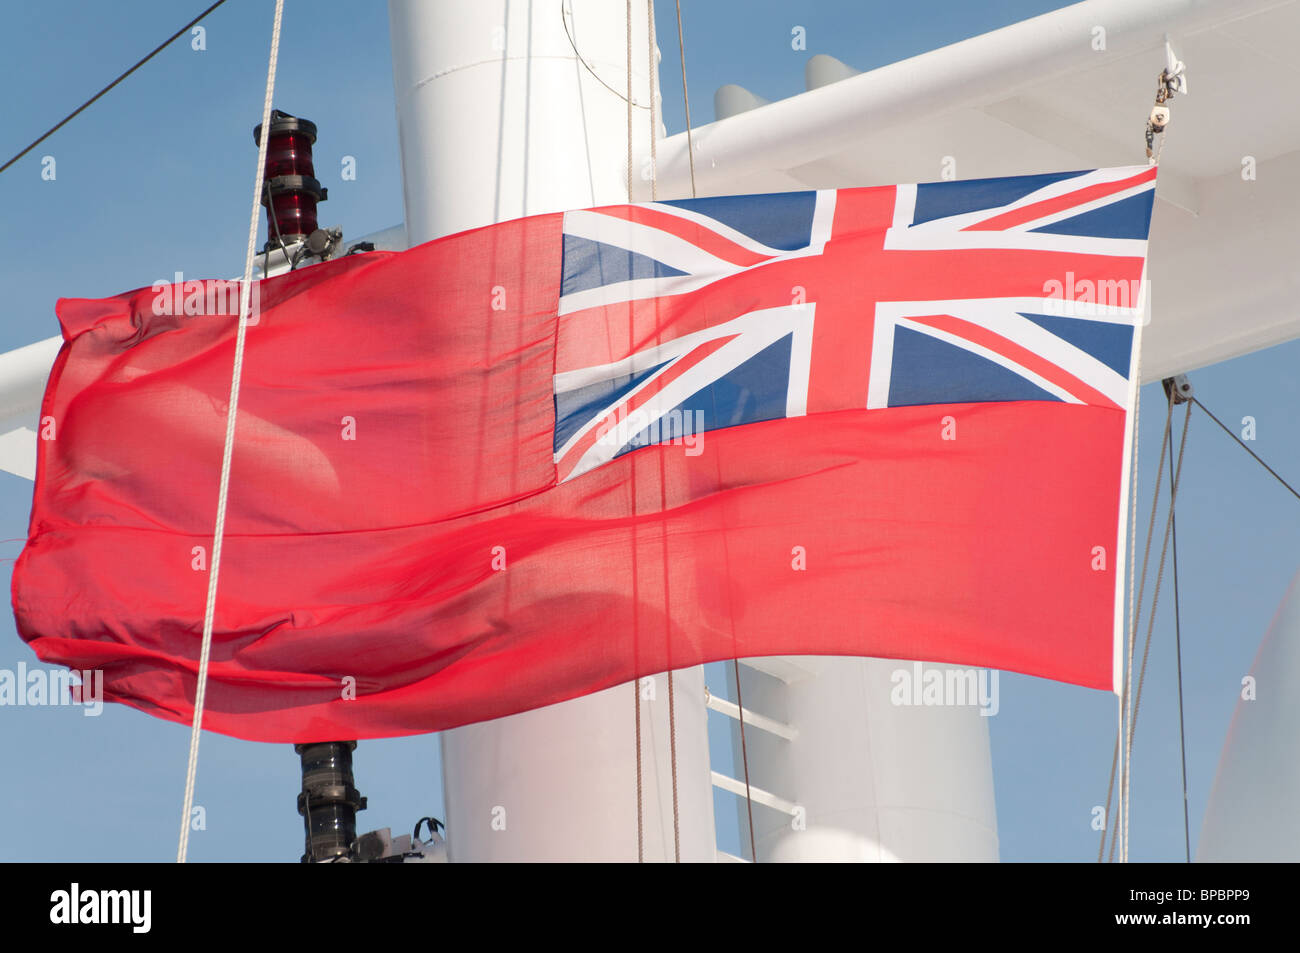 The Red Ensign flag which is used for civilian ships visiting UK waters. Stock Photo